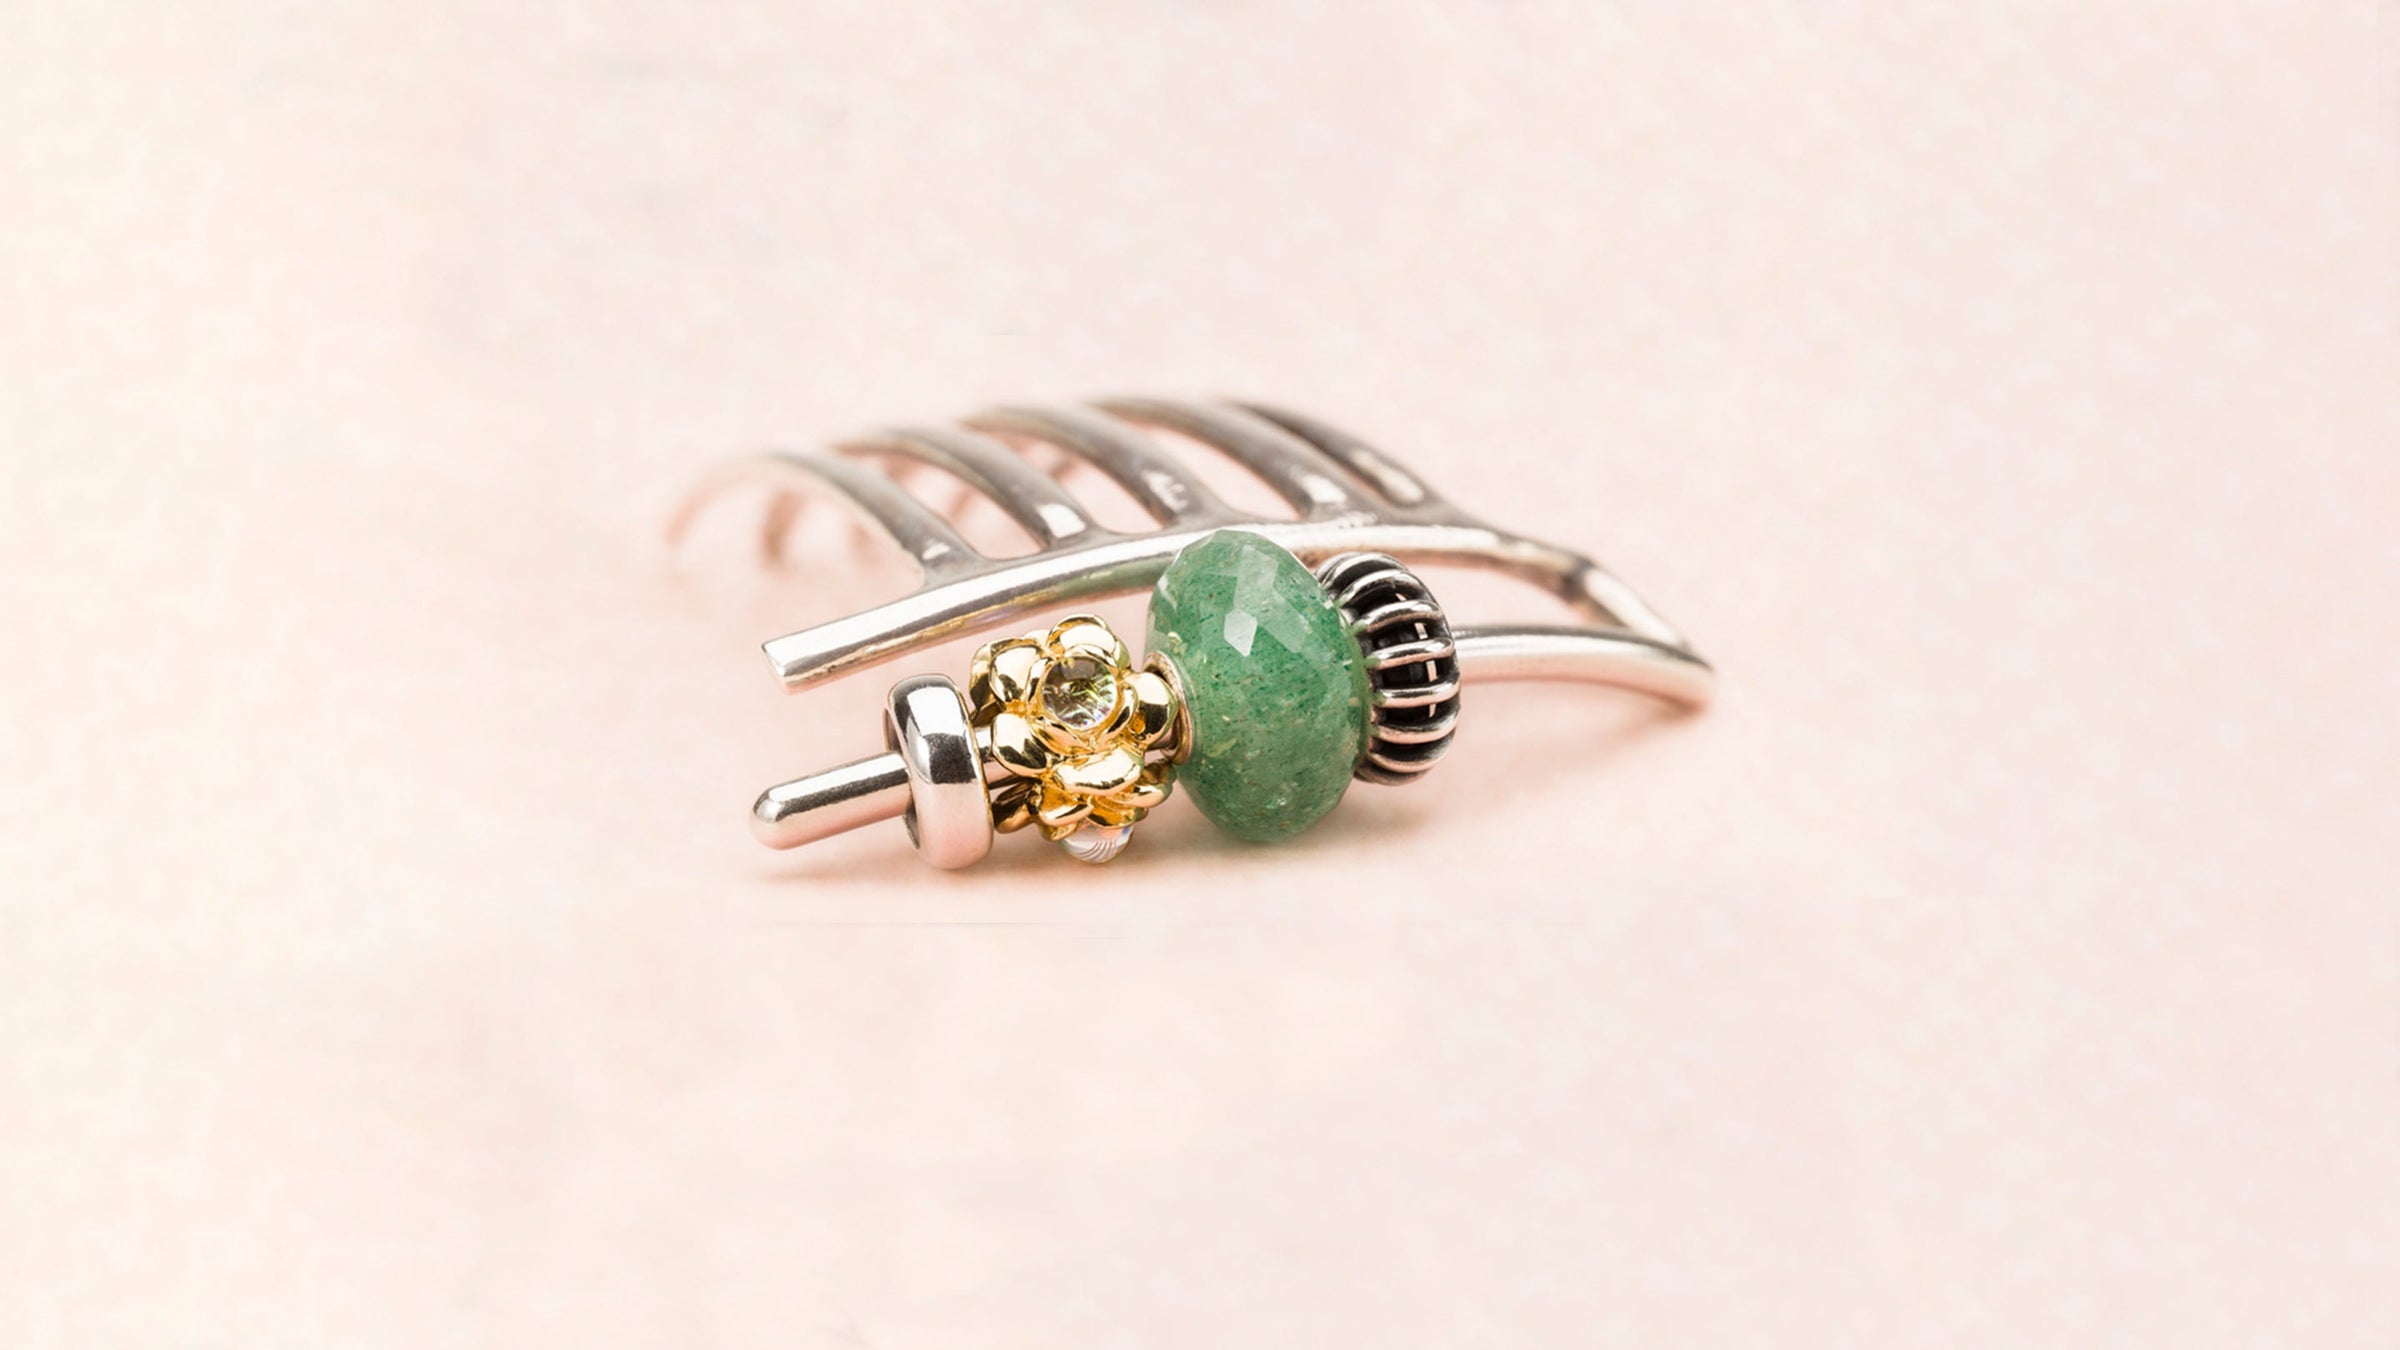 Trollbeads Hair Comb with a gold bead, a aventurine bead and 2 silver spacers